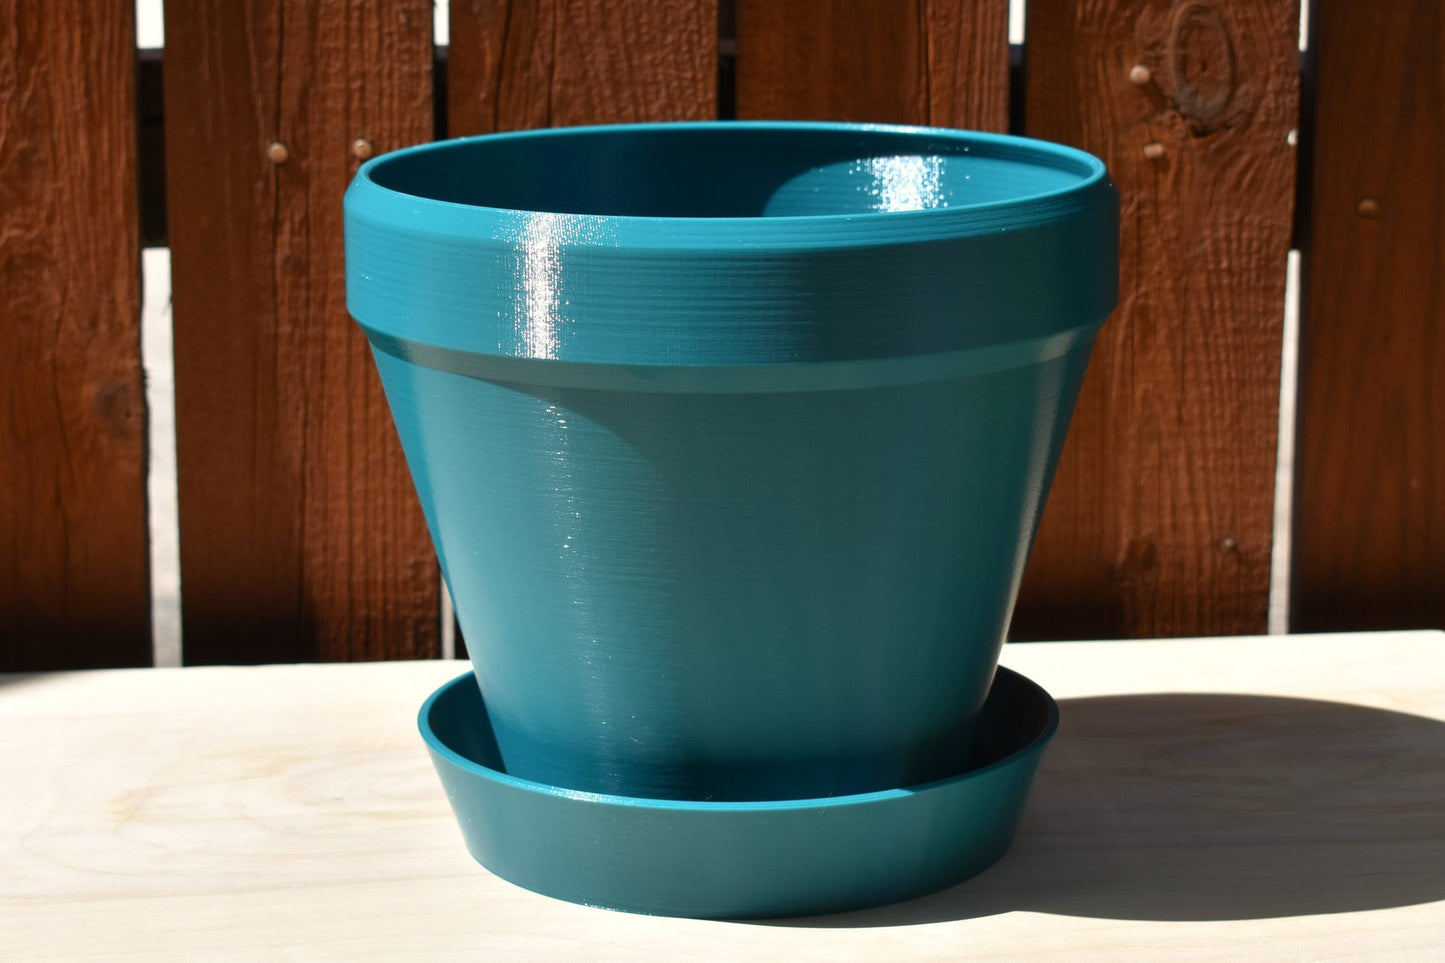 8-inch Round Plant Pot and Optional Saucer, 20+ Colors, Outdoor or Indoor